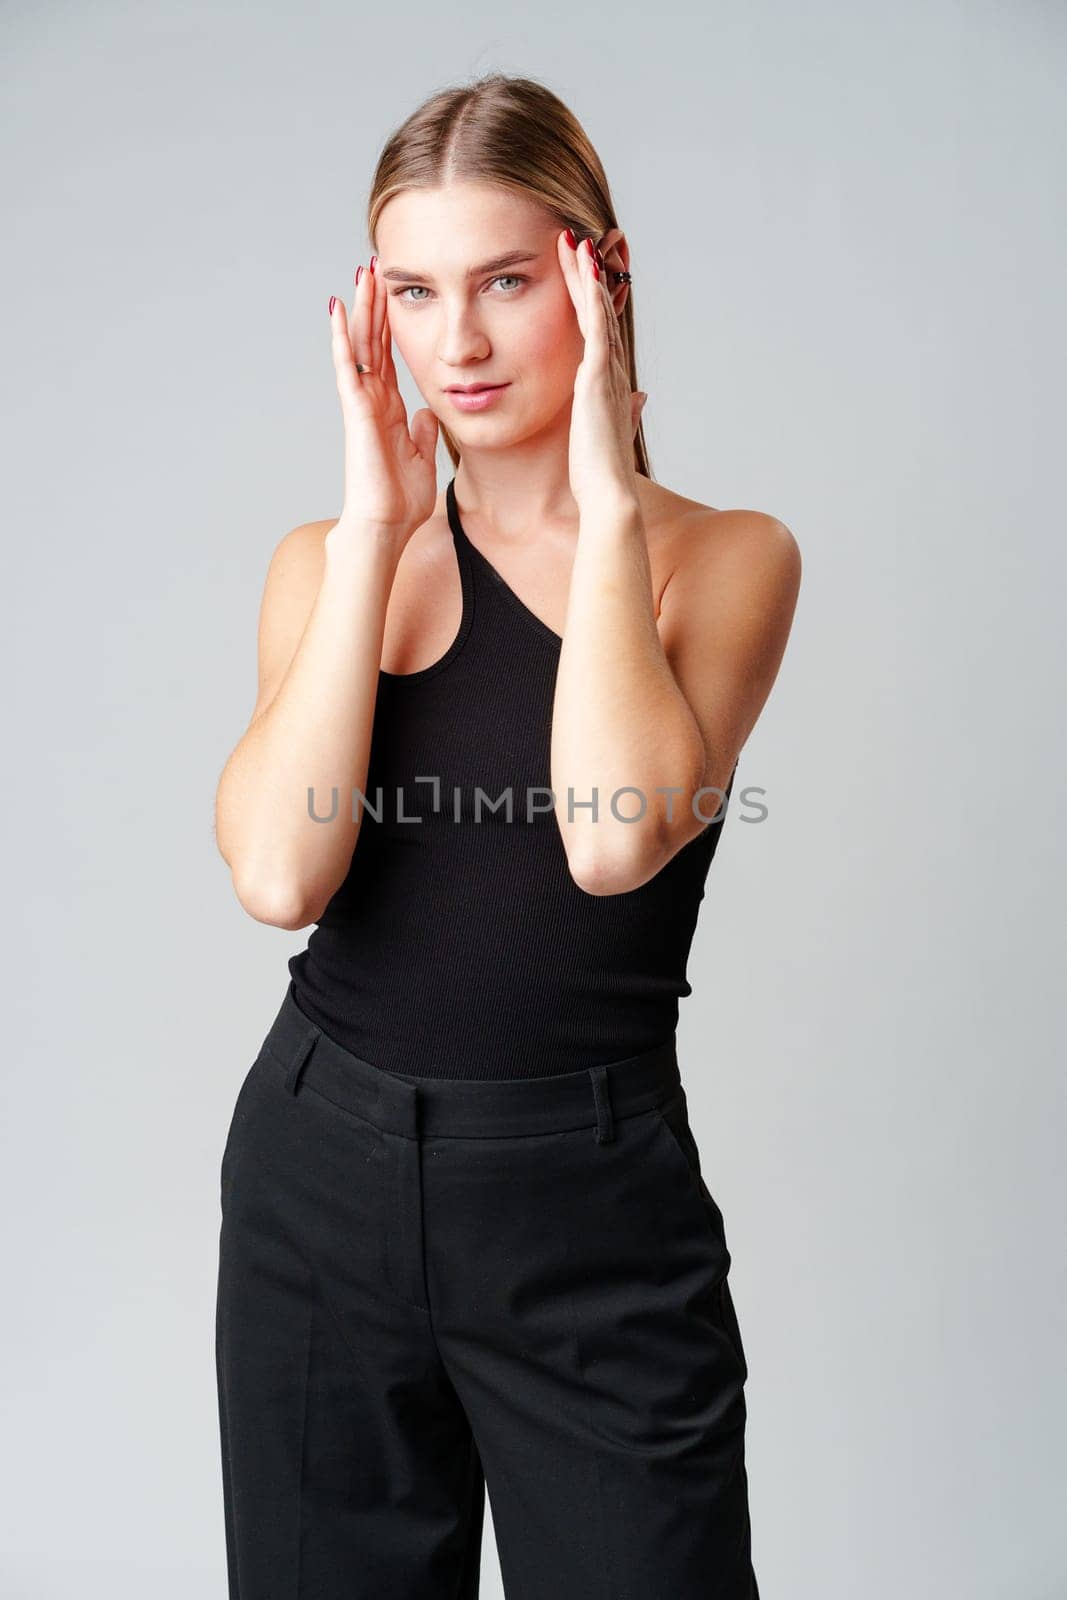 Young Woman Model in Black Top and Pants Posing on gray background by Fabrikasimf